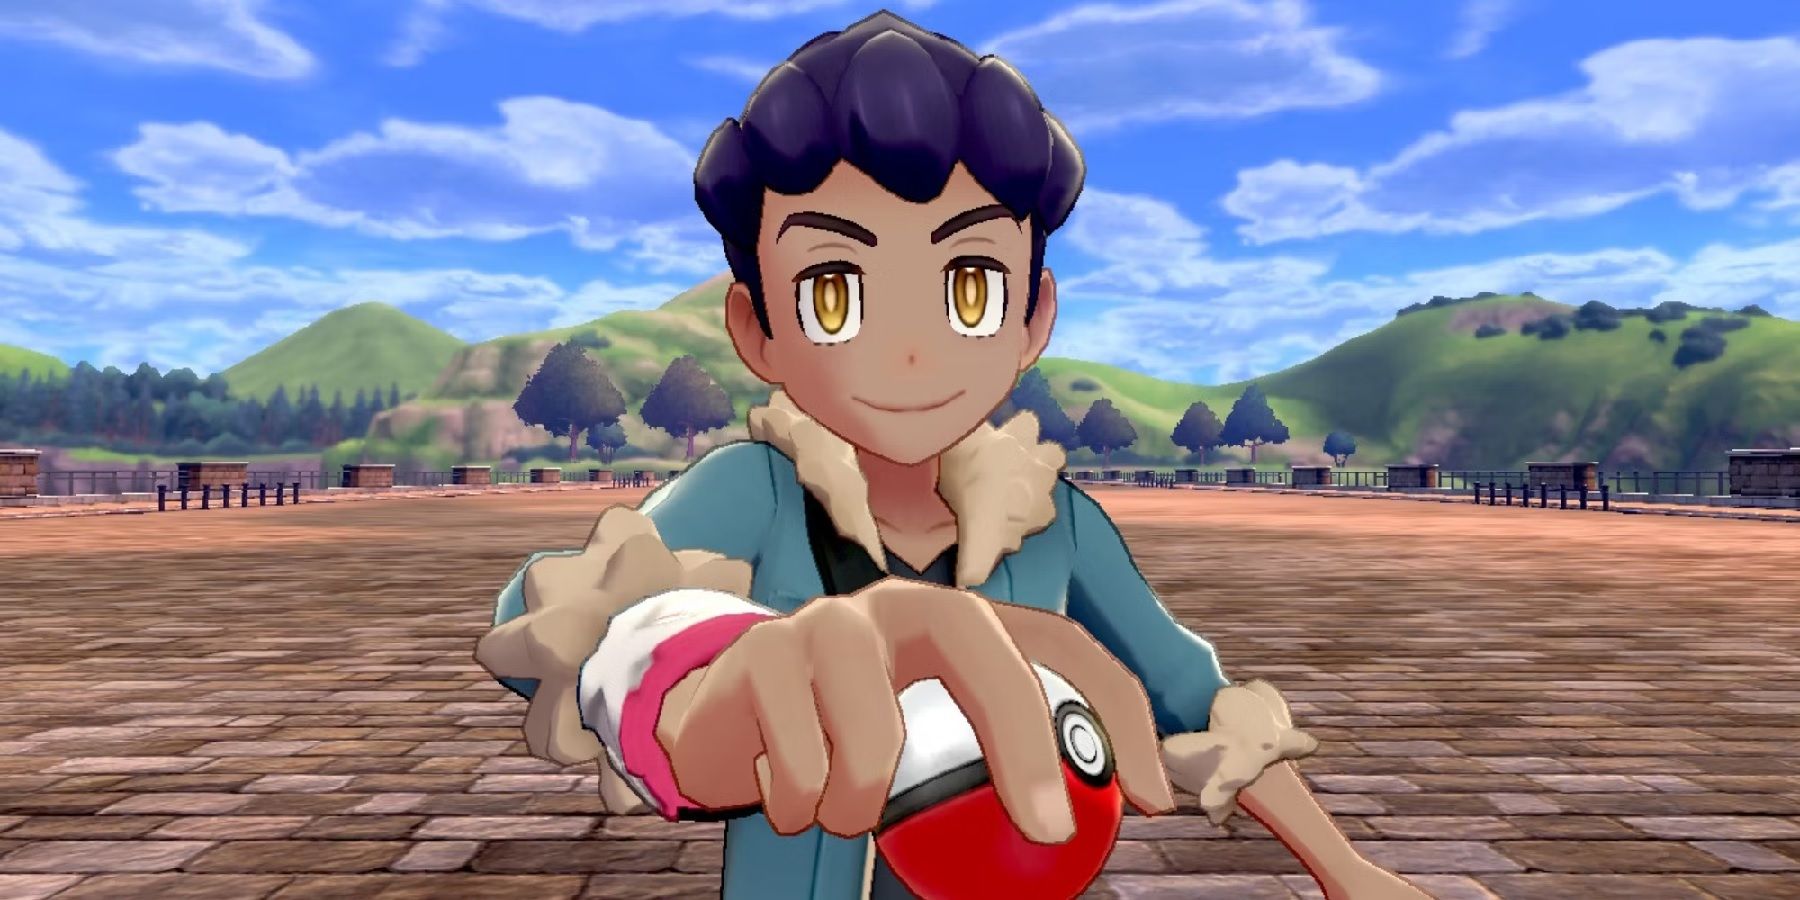 Pokémon Sword and Shield are getting their last update early next month